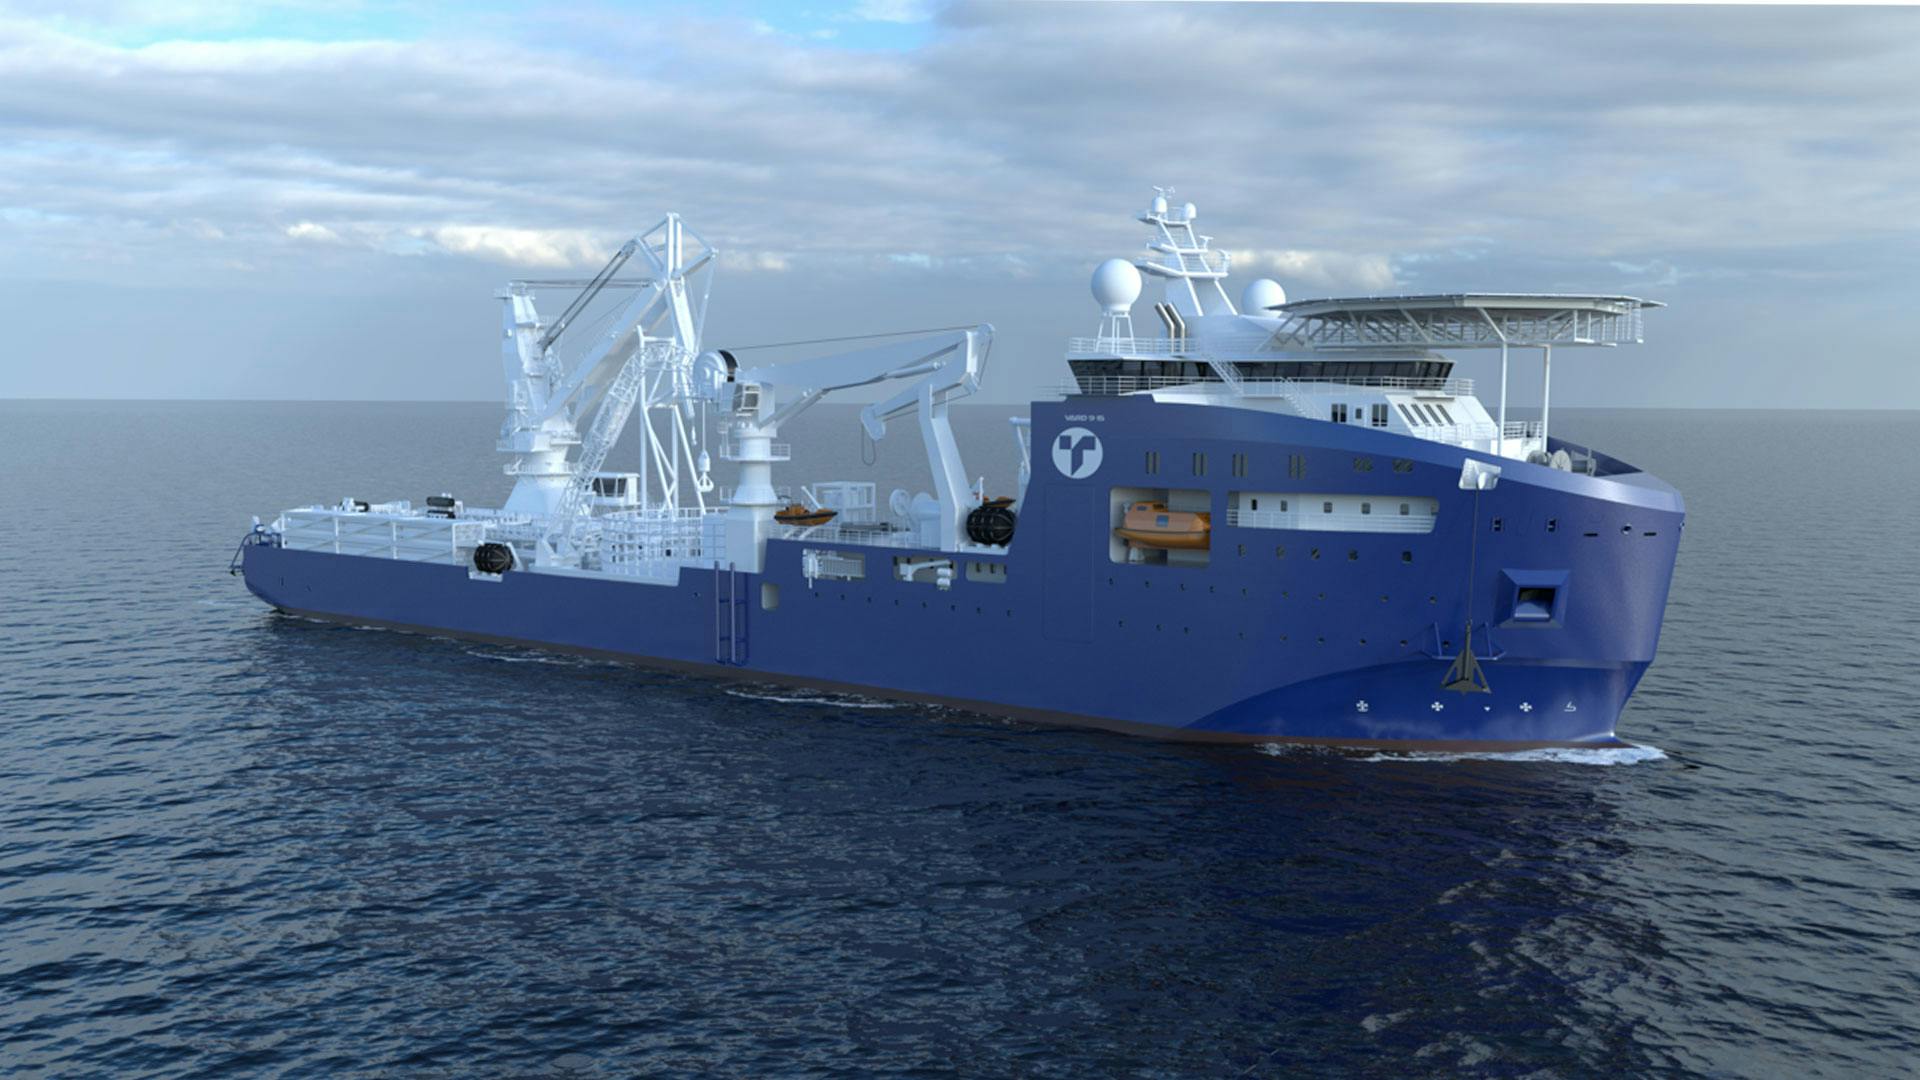 Render of a Remacut Vard Toyo construction hybrid vessel at sea